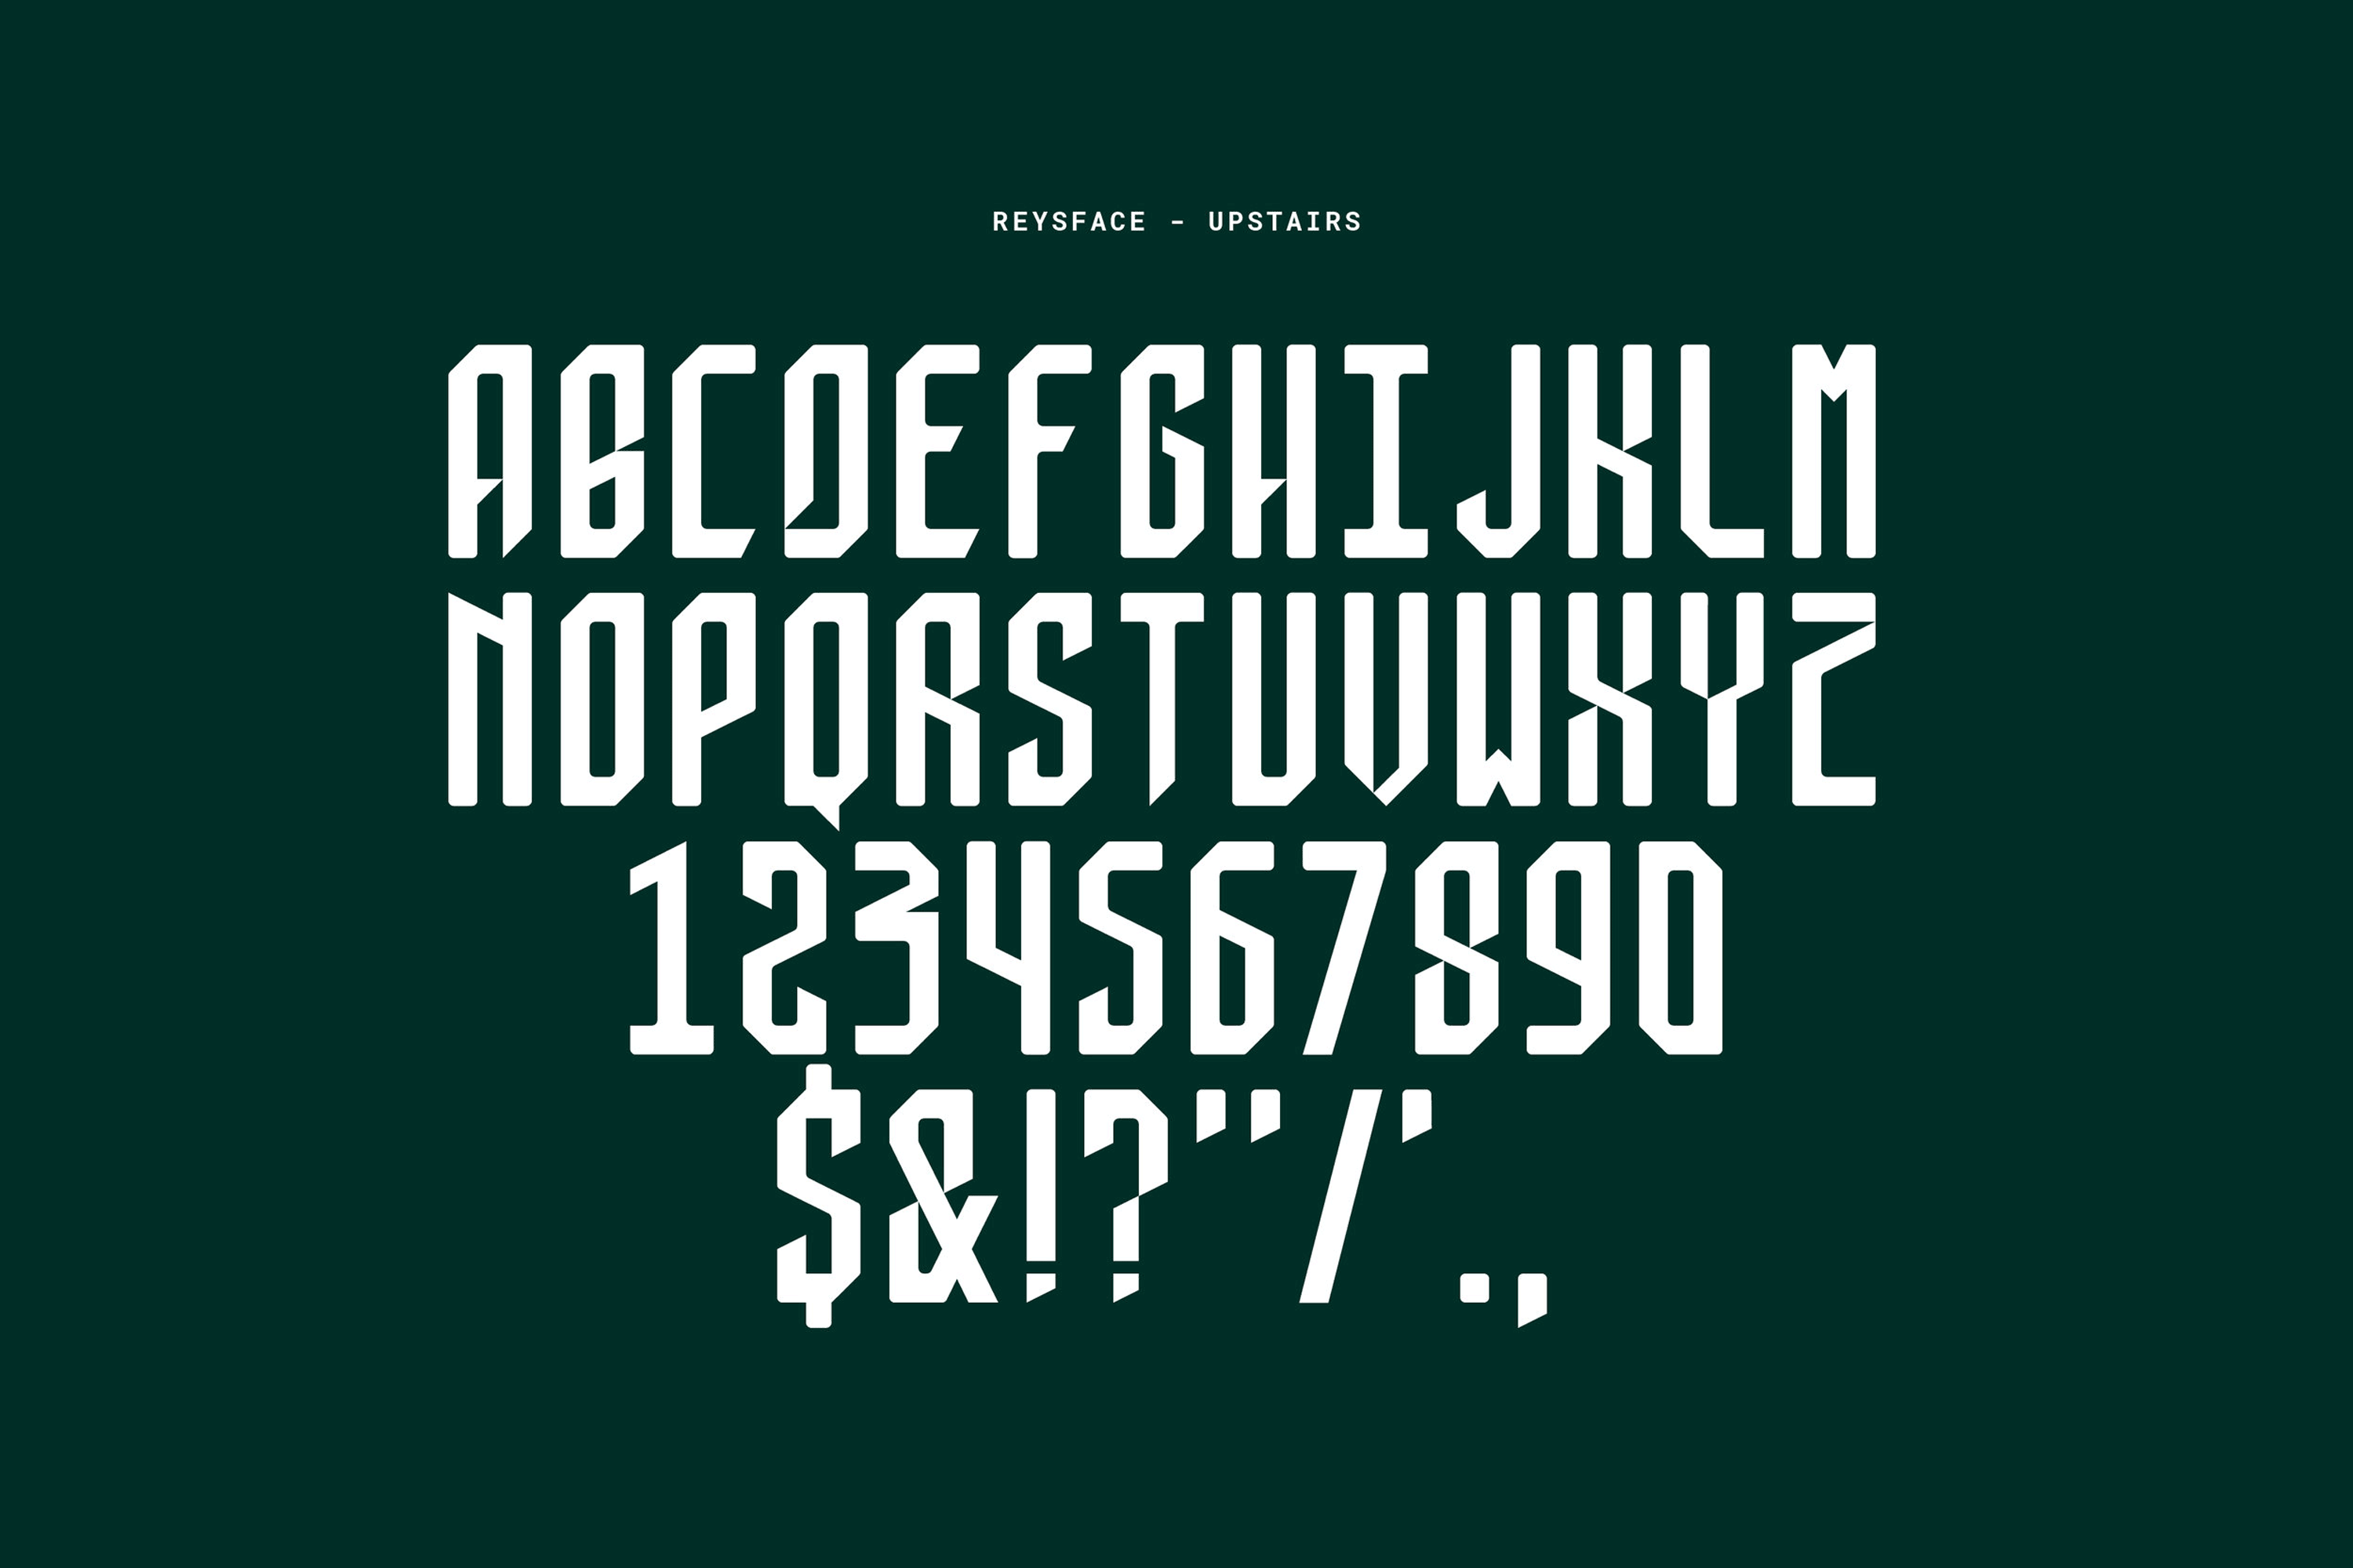 The corporate typeface is inspired by Filipino calligraphy.